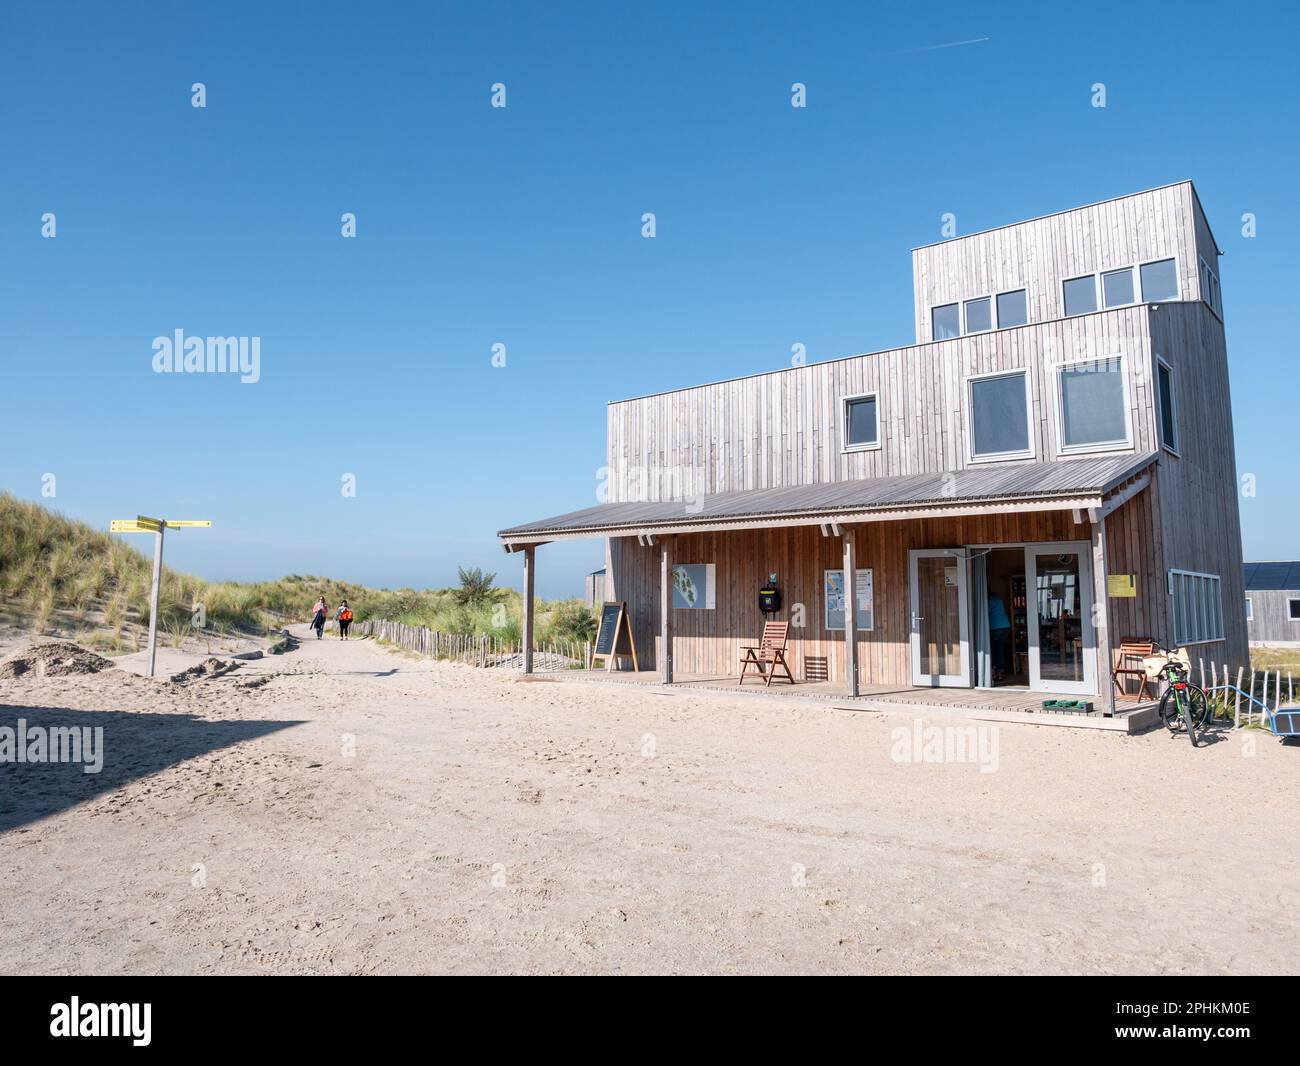 People walking on footpath and sustainable wooden visitor centre on Marker Wadden island, Netherlands Stock Photo